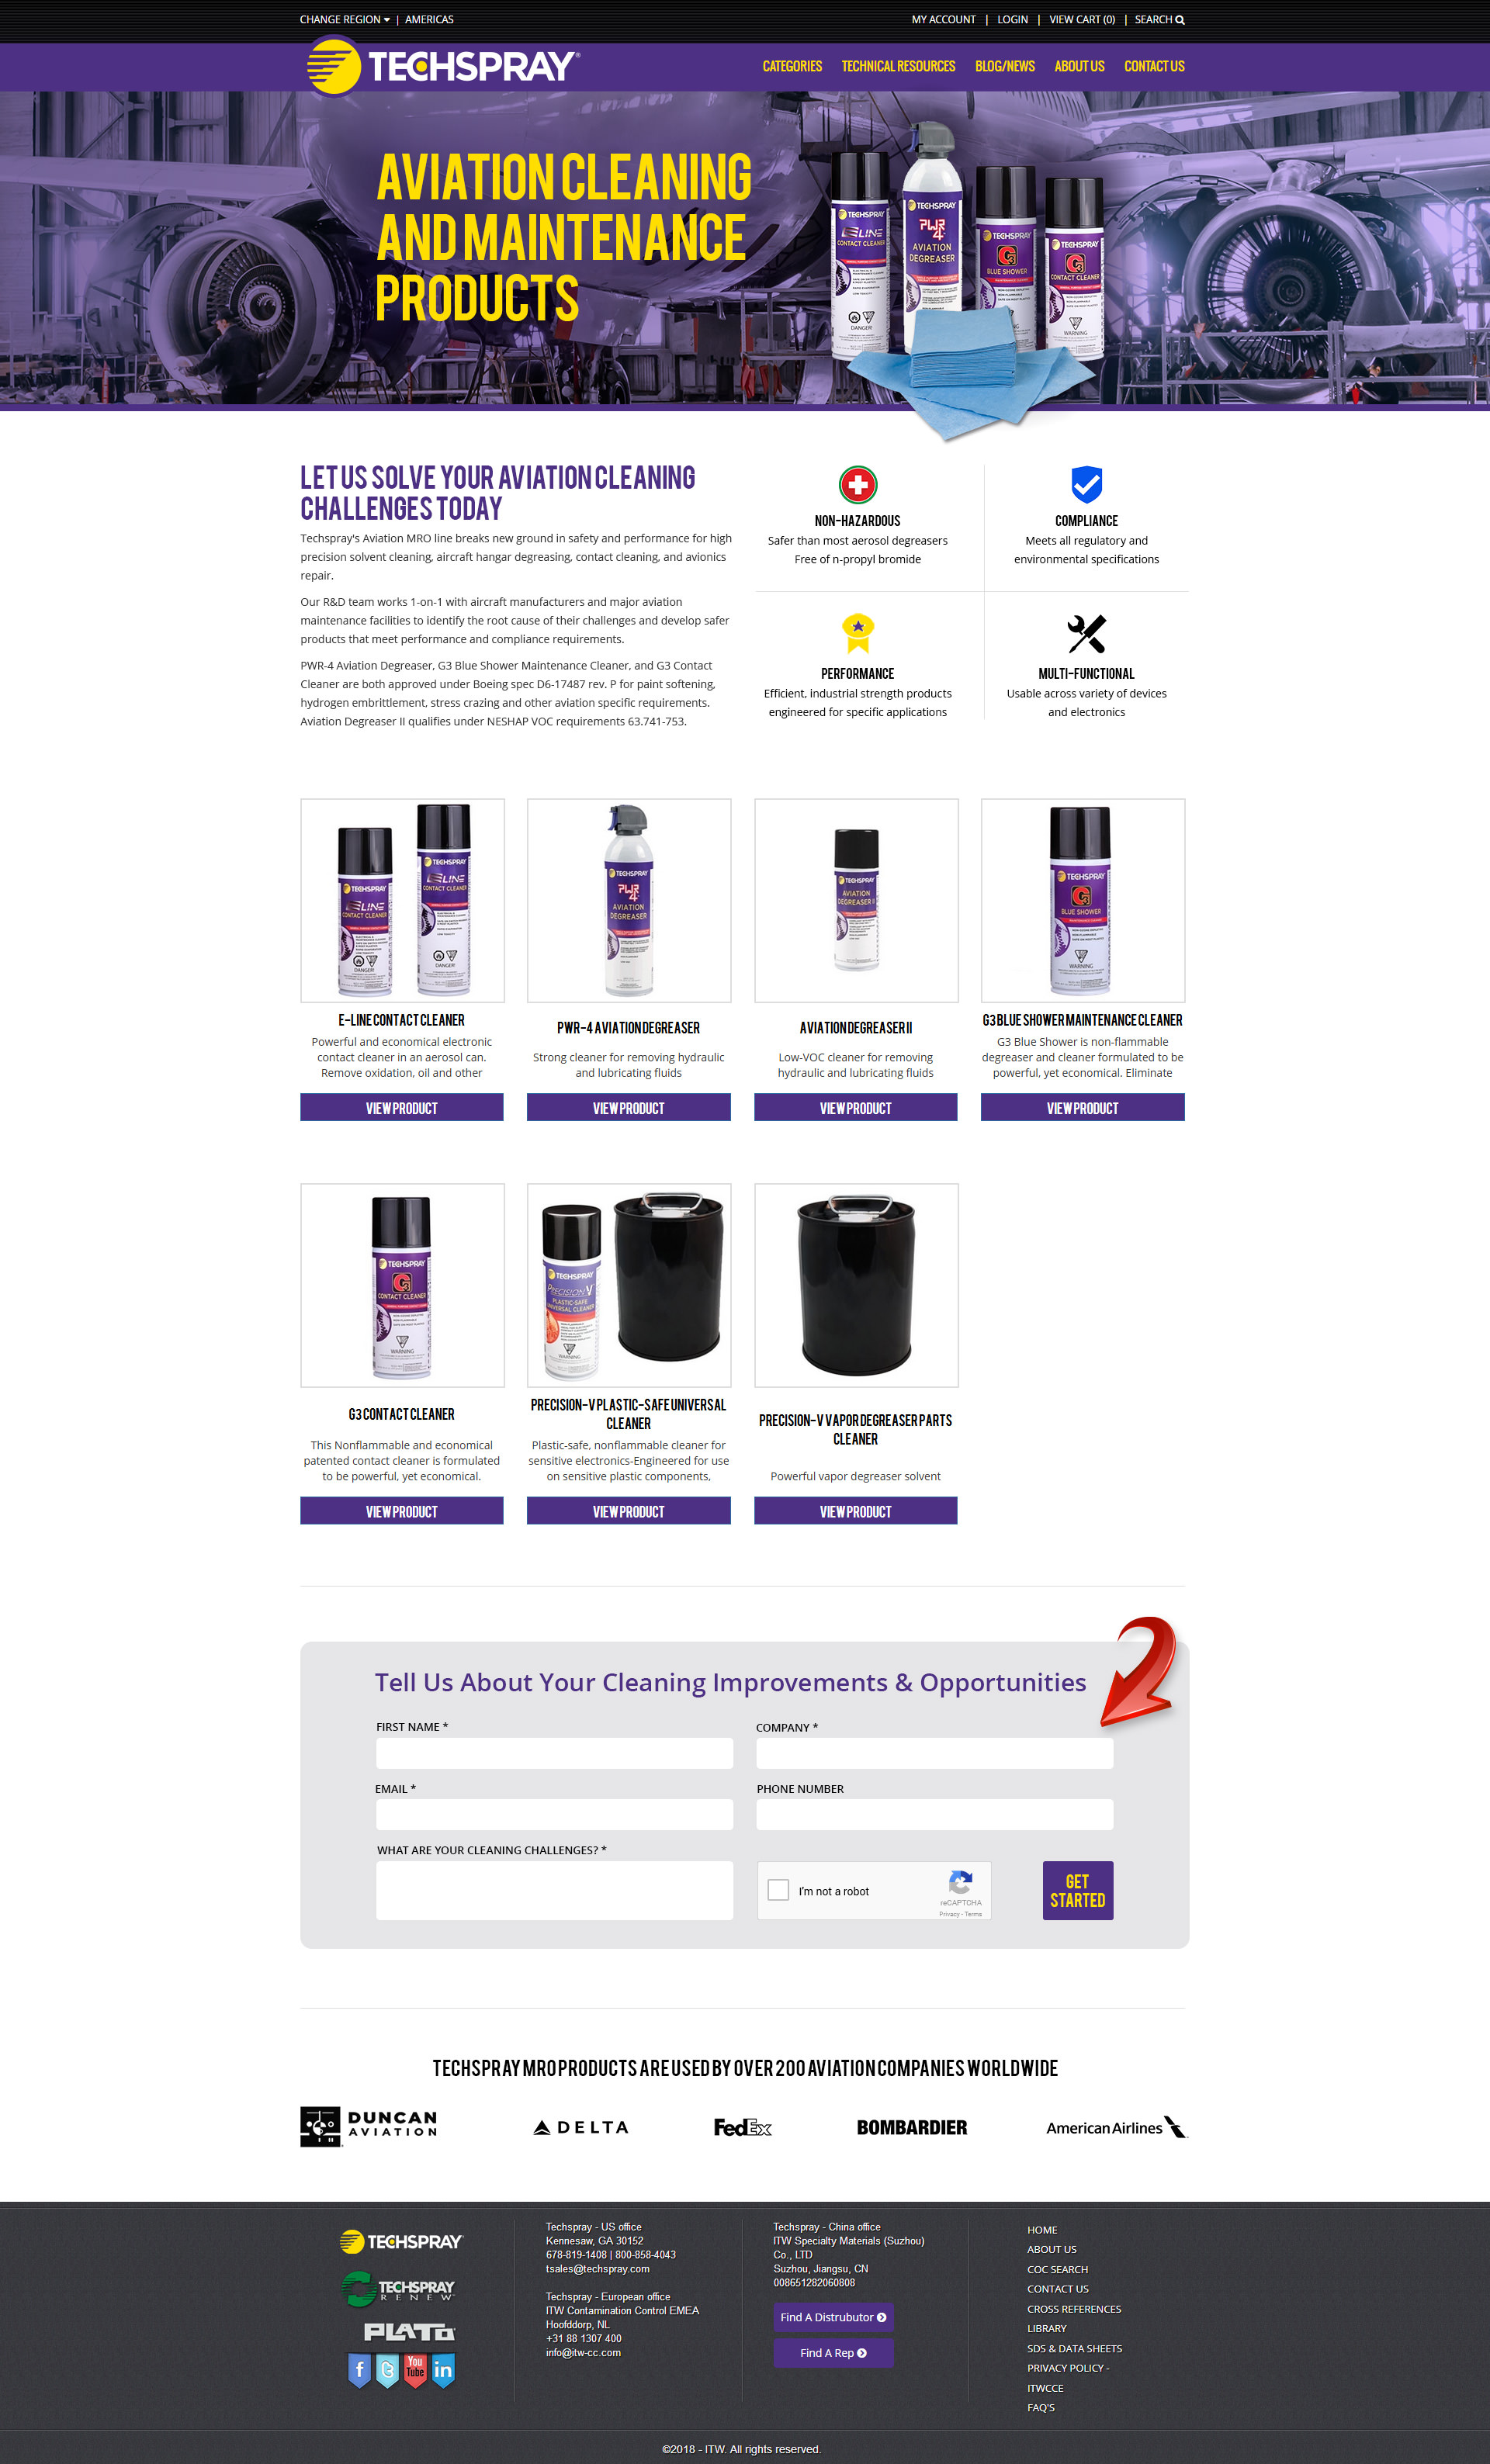 Example of the new and improved nopCommerce website designed by Foremost Media for Techspray